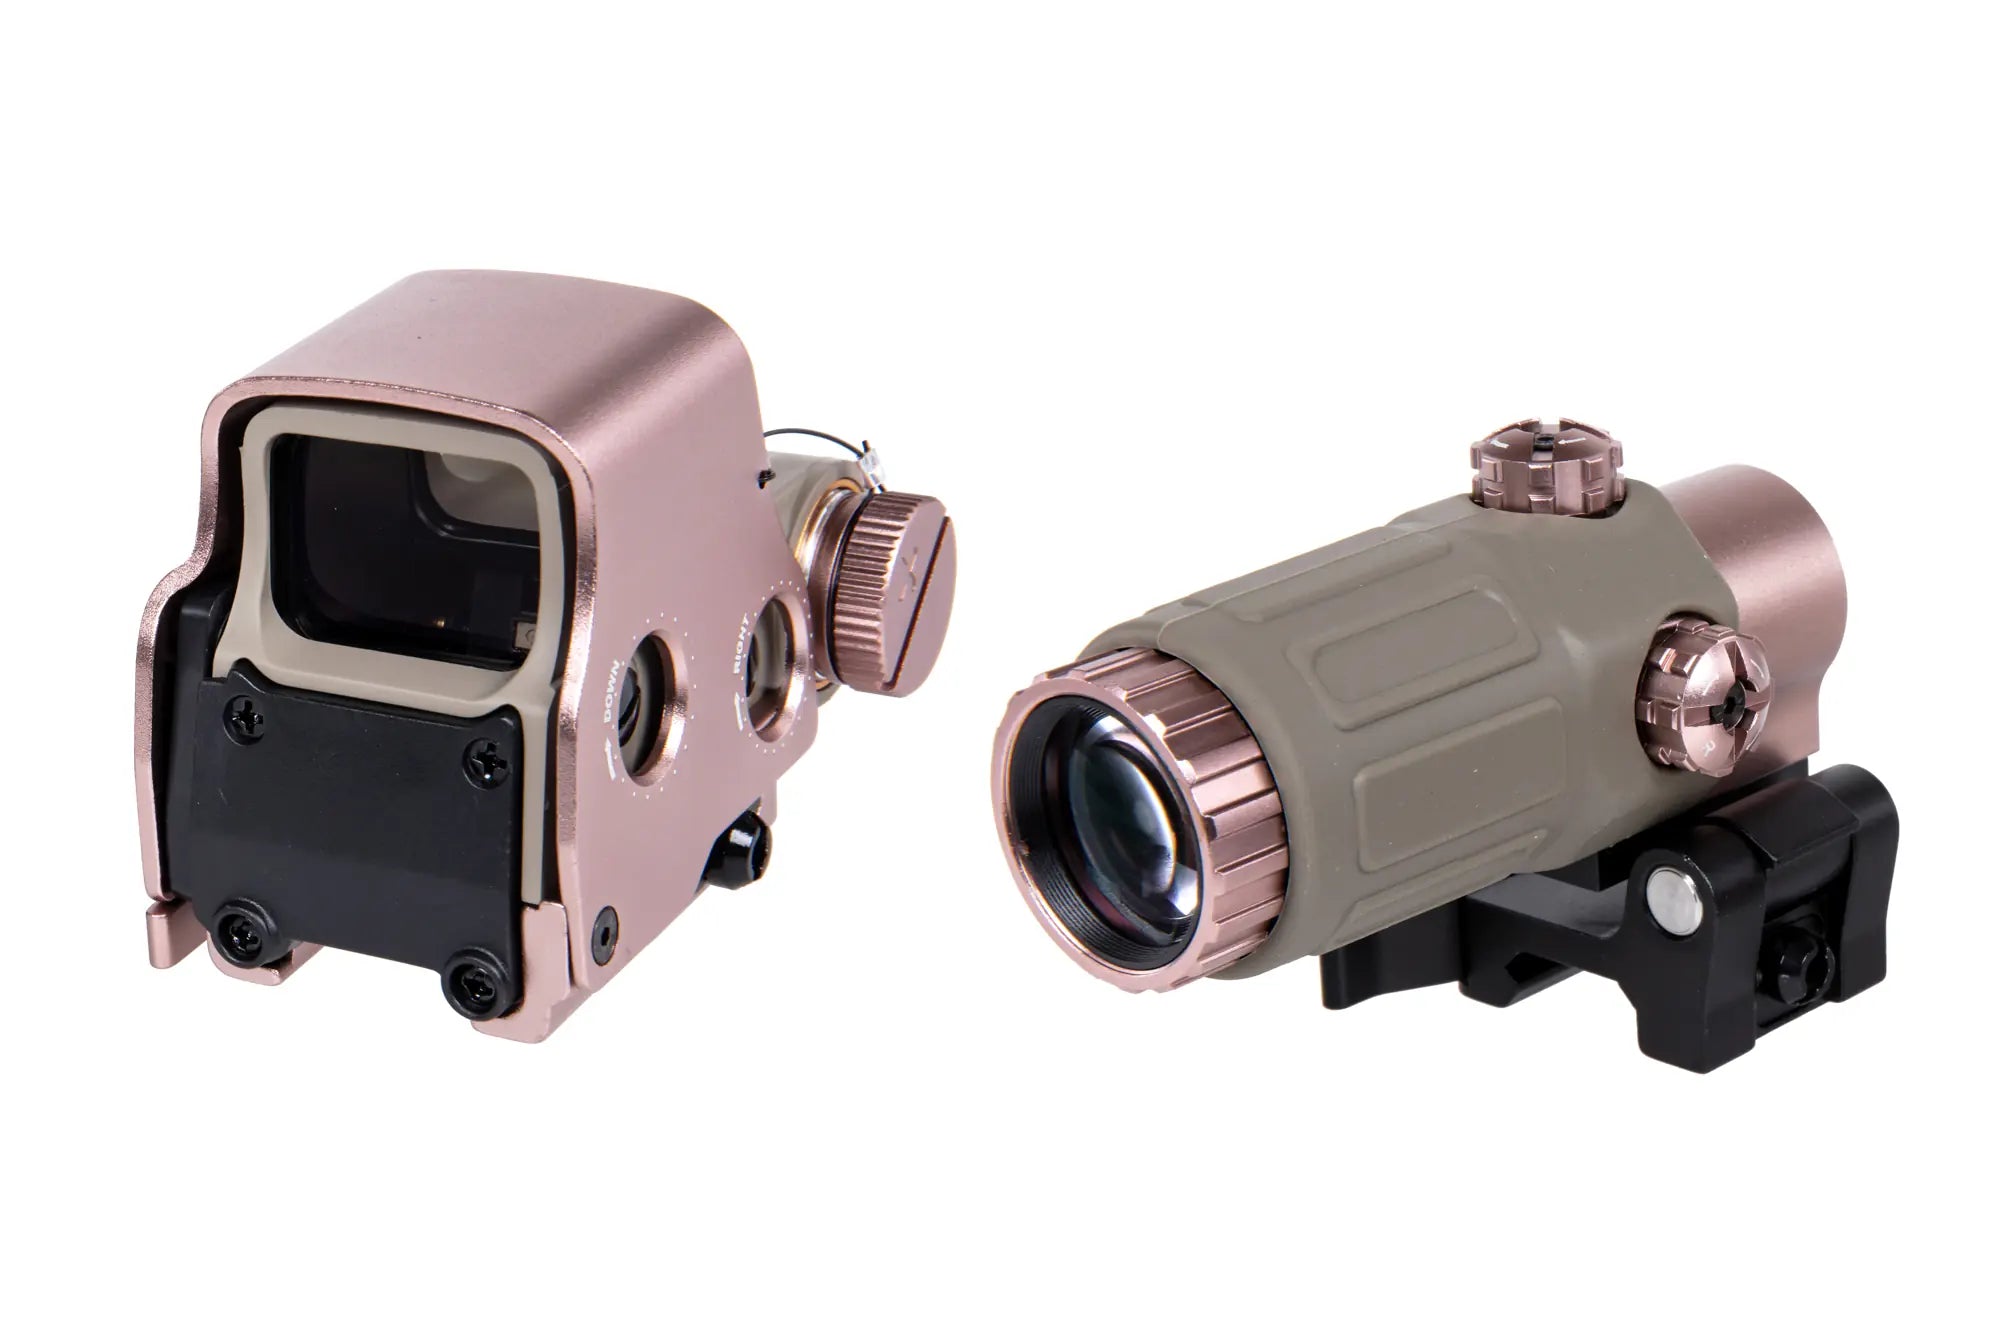 EXPS type collimator sight set with magnifier type G33 Dark Earth